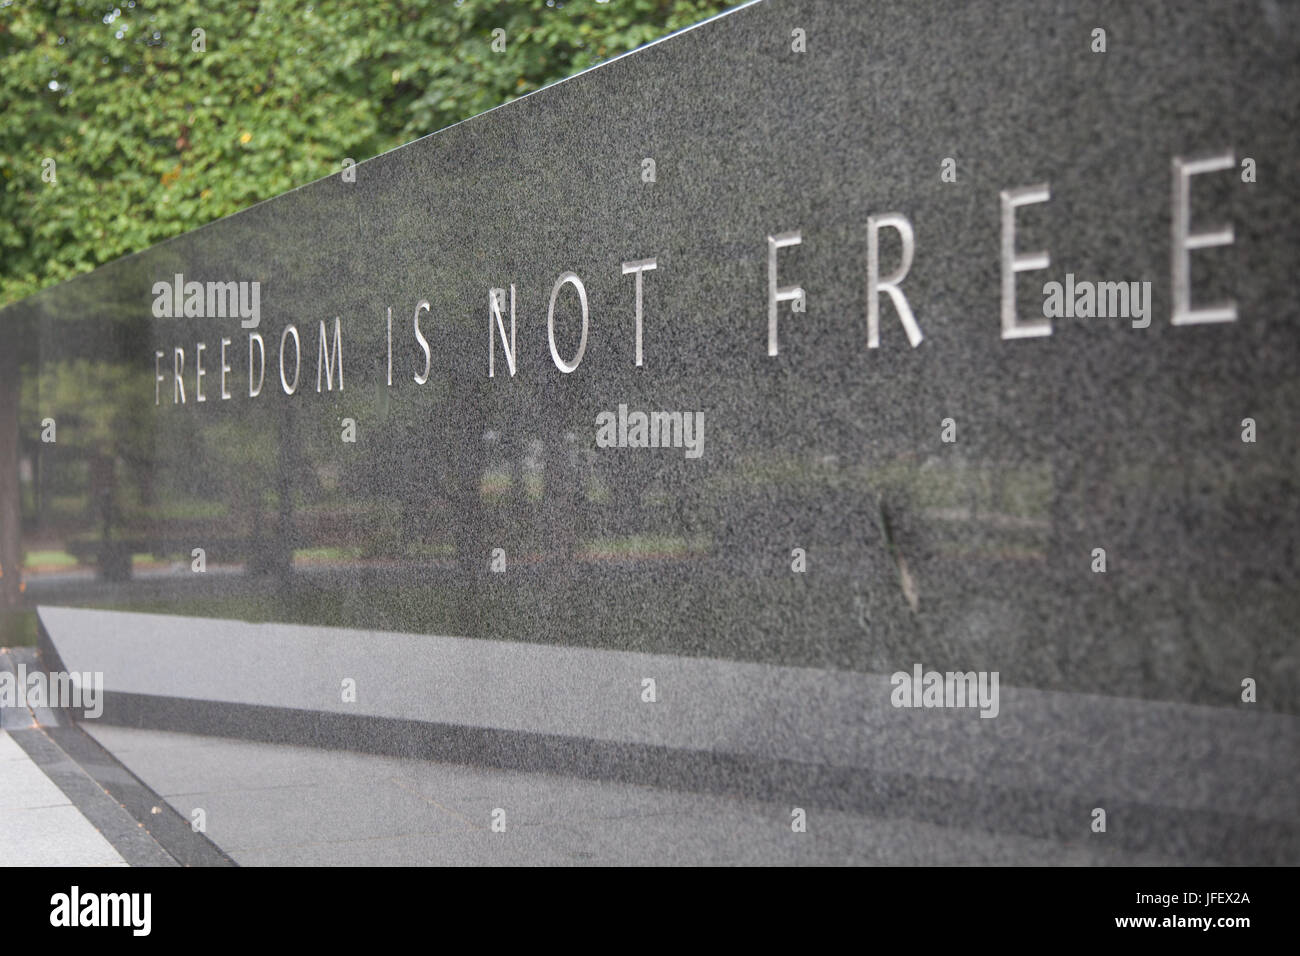 WASHINGTON, DC - AUGUST 2012: Granite monument at the Korean War Memorial which reads: 'Freedom Is Not Free'. The Korean War Memorial is located in We Stock Photo